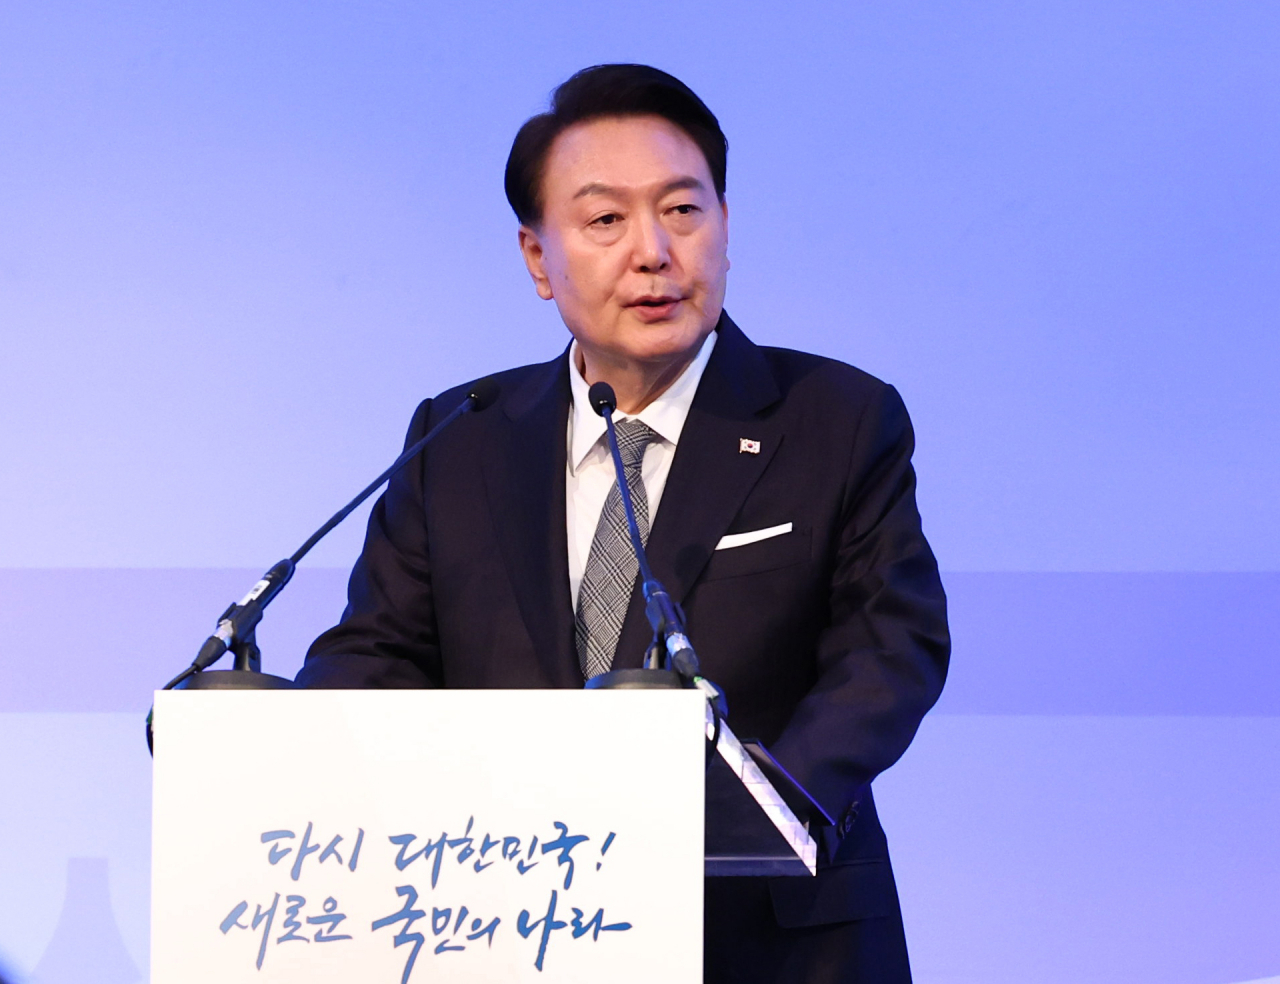 President Yoon Suk Yeol speaks during a meeting with overseas Koreans in London on Monday. (Yonhap)